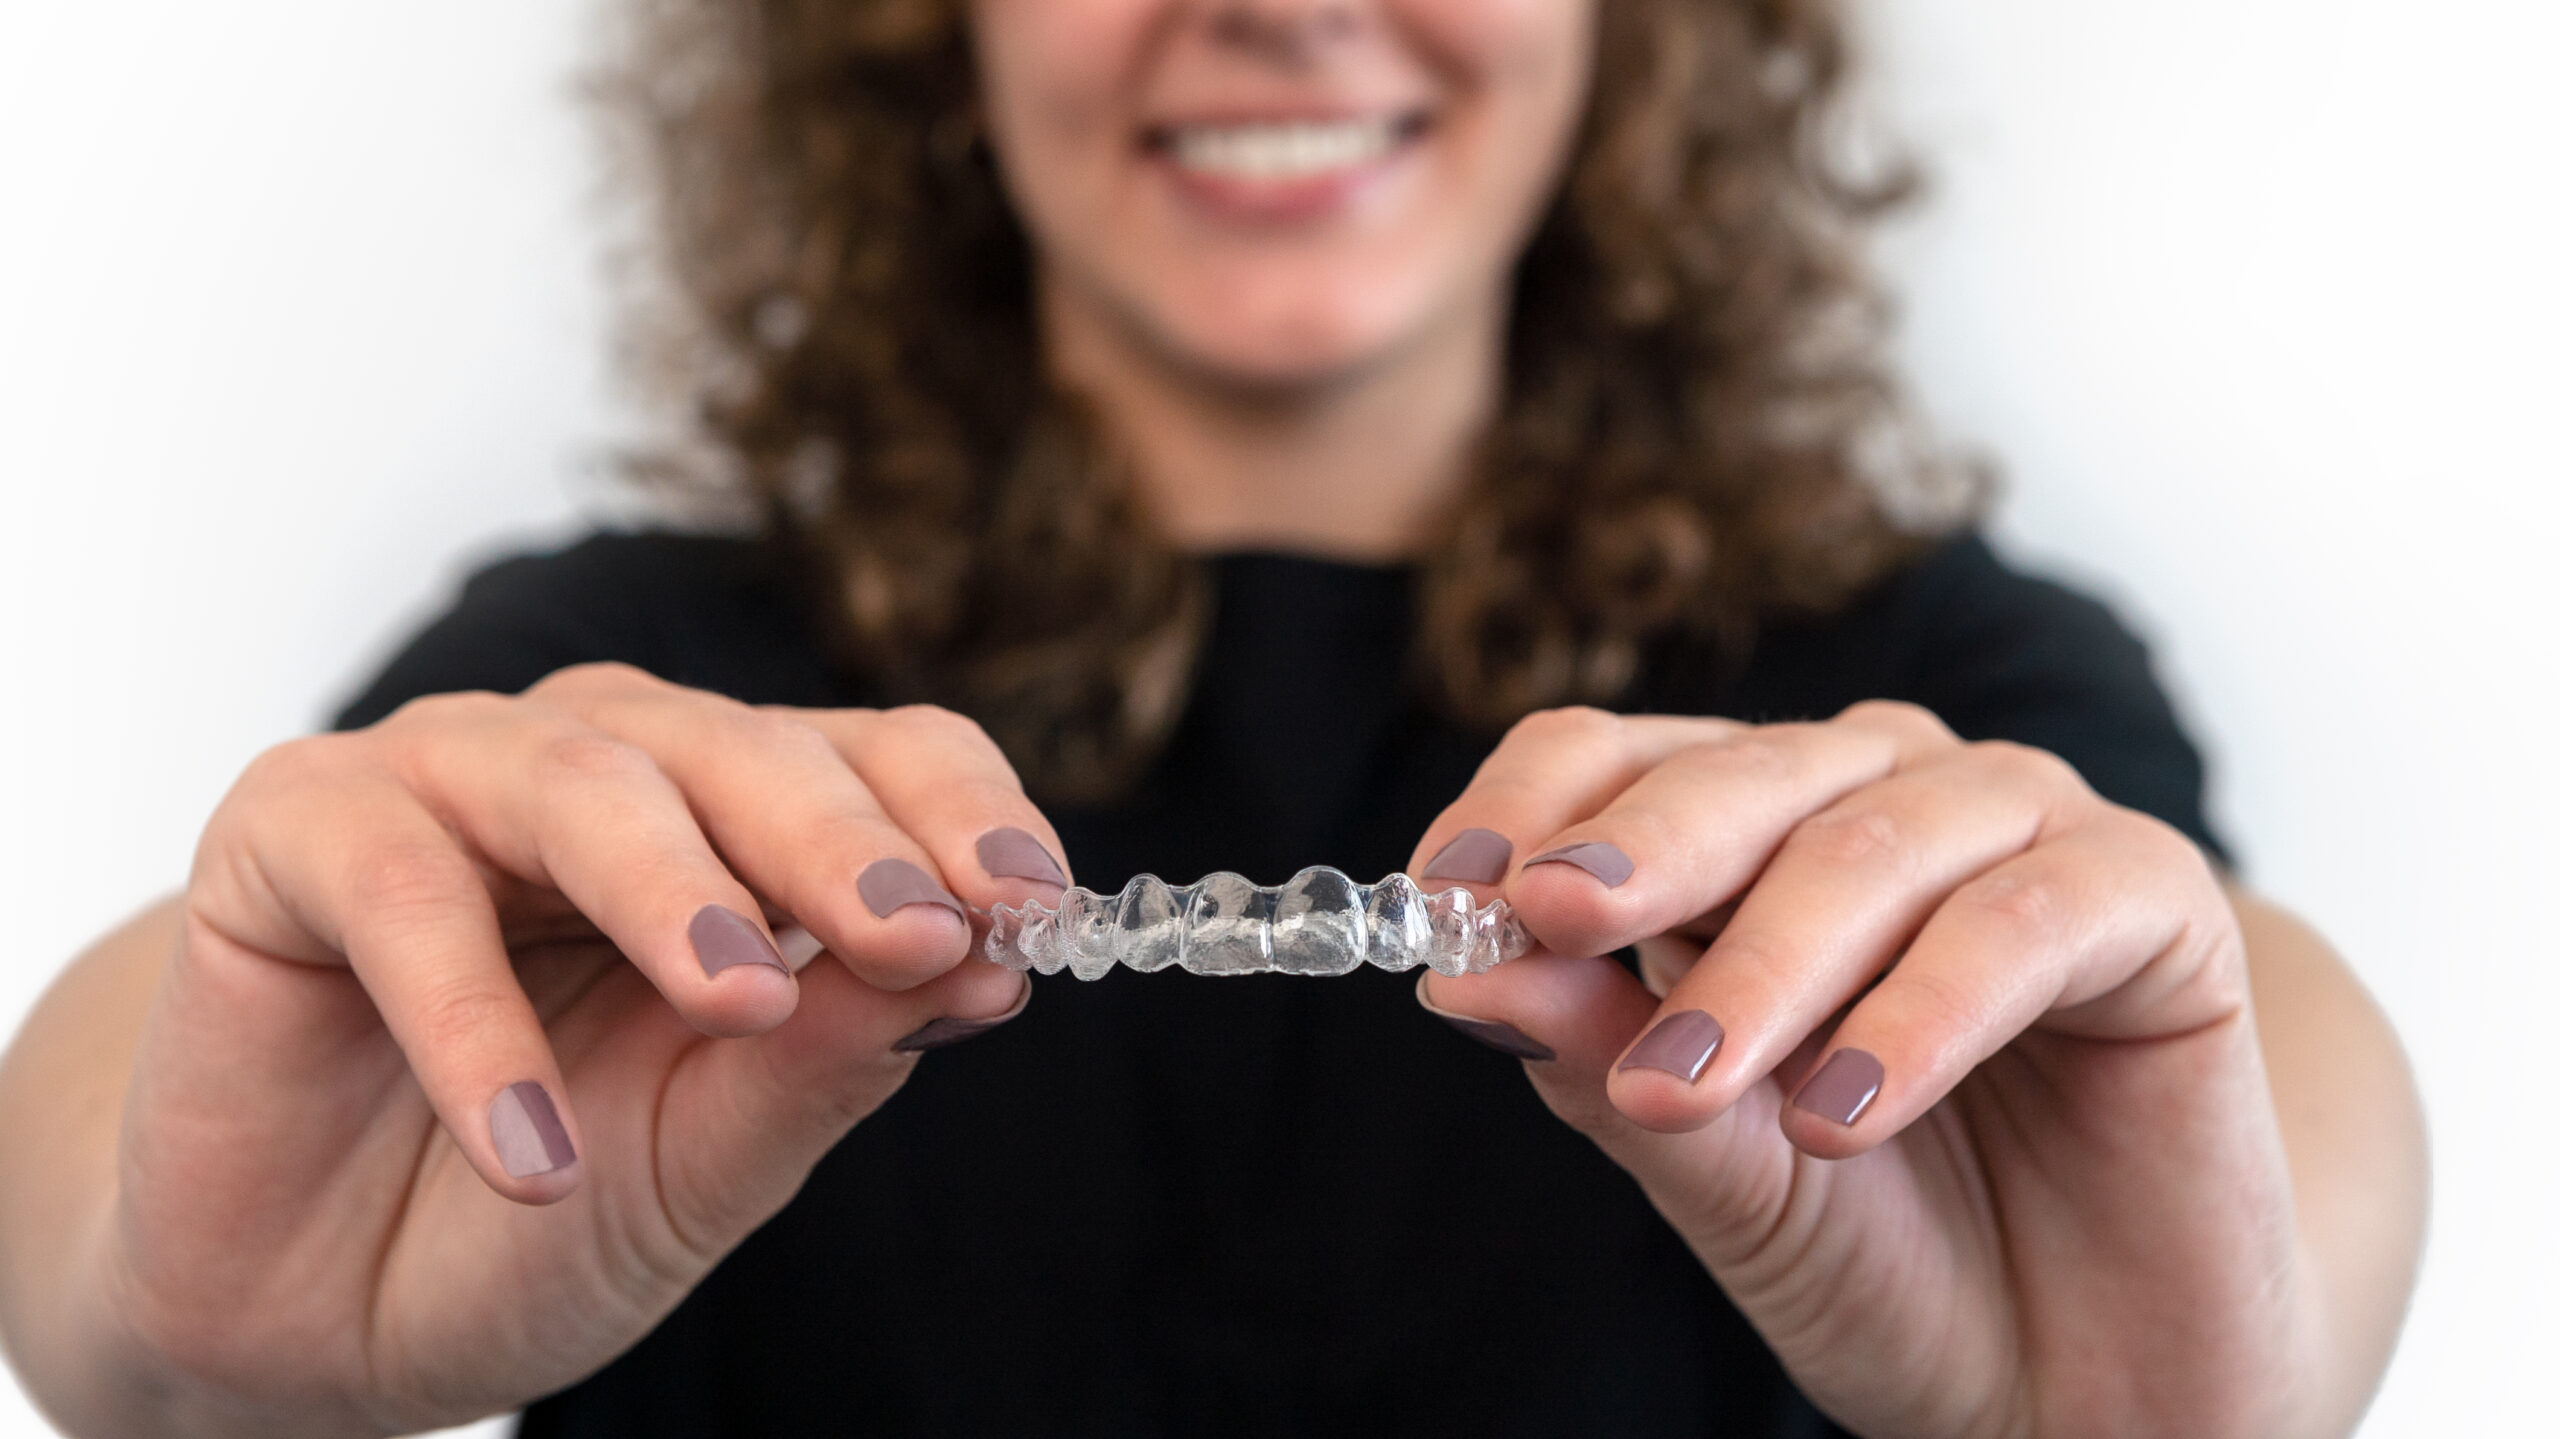 Caucasian young woman showing an invisible silicone aligner for dental correction. Female hand holding the plastic braces dentistry retainers to straighten teeth